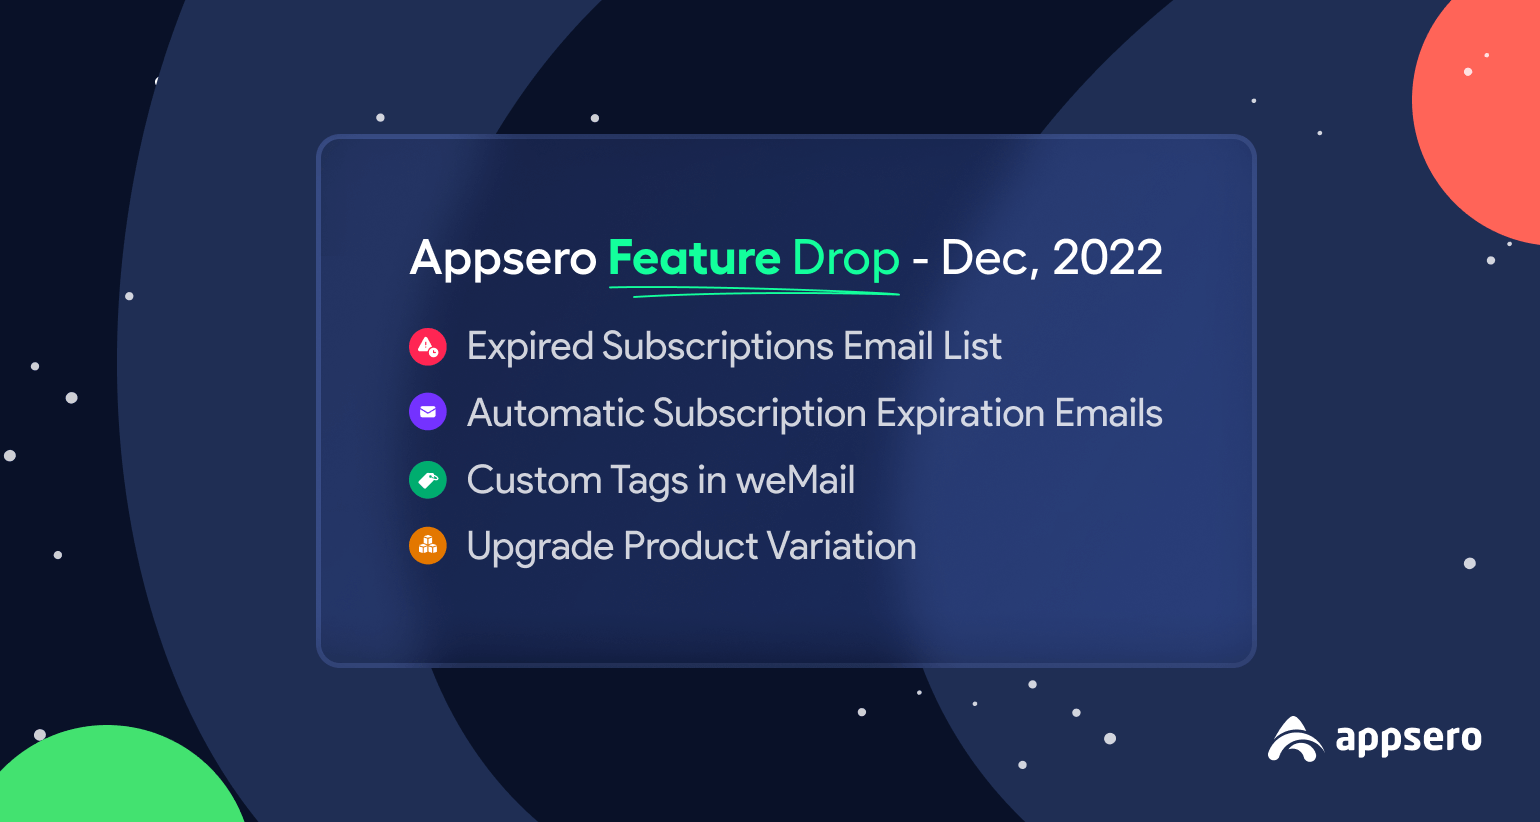 Feature Release 🎉: Automatic subscription expiration emails, custom tags in weMail, product variation upgrades, and more